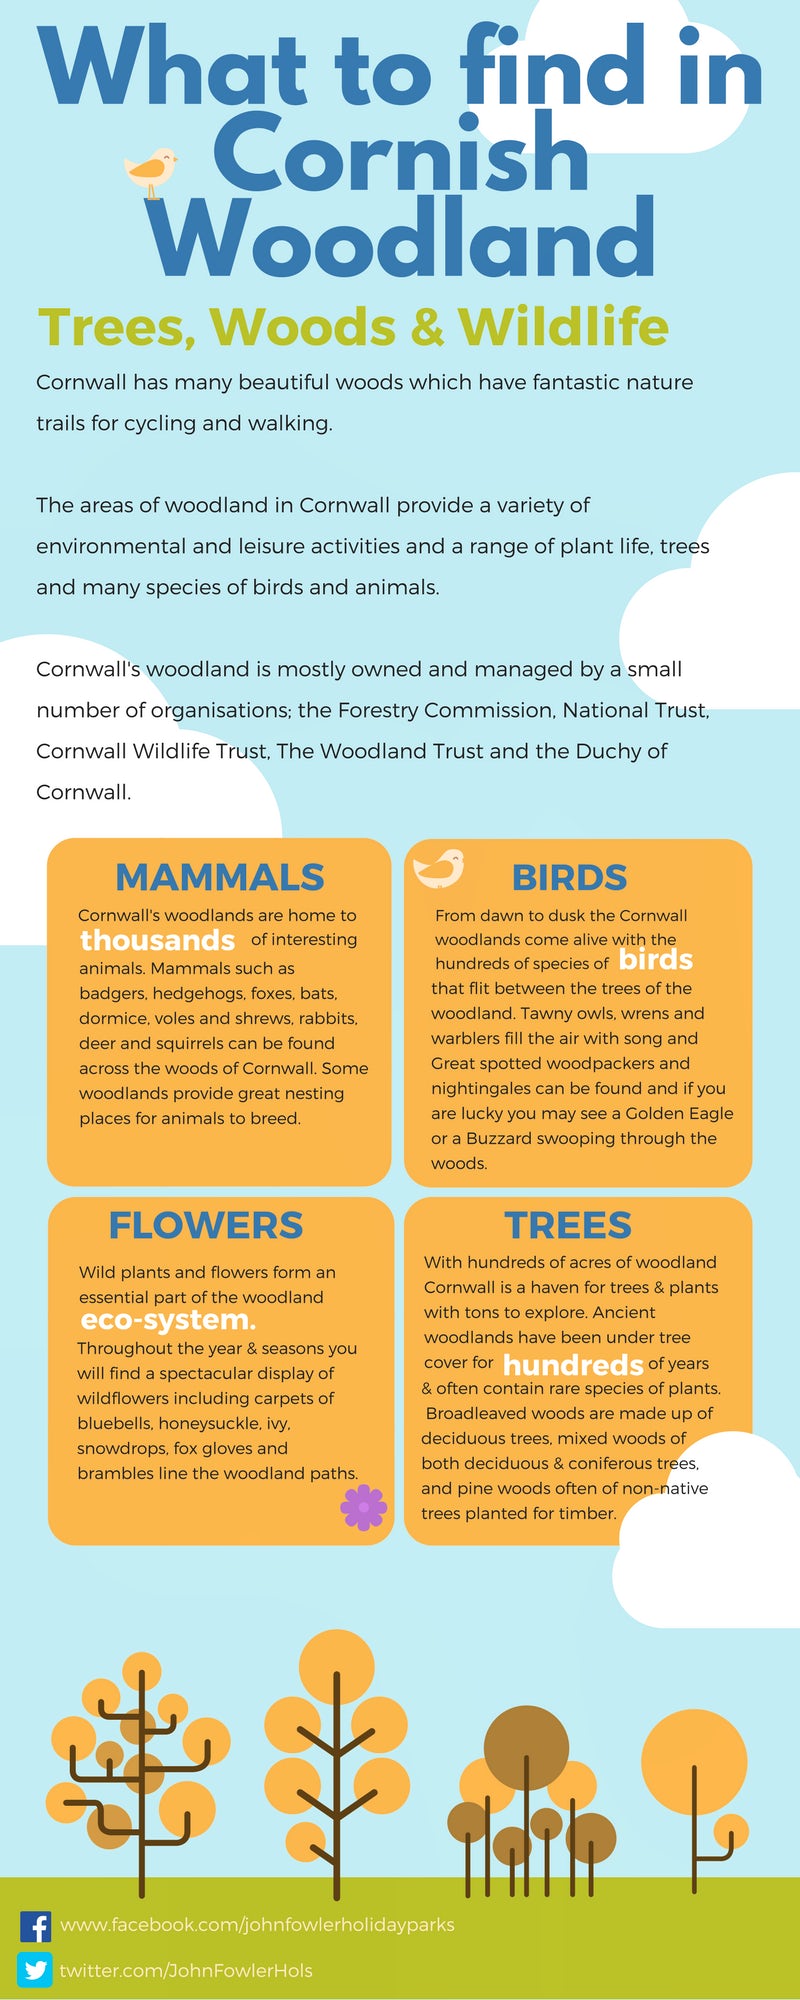 What to find in Cornish Woodland